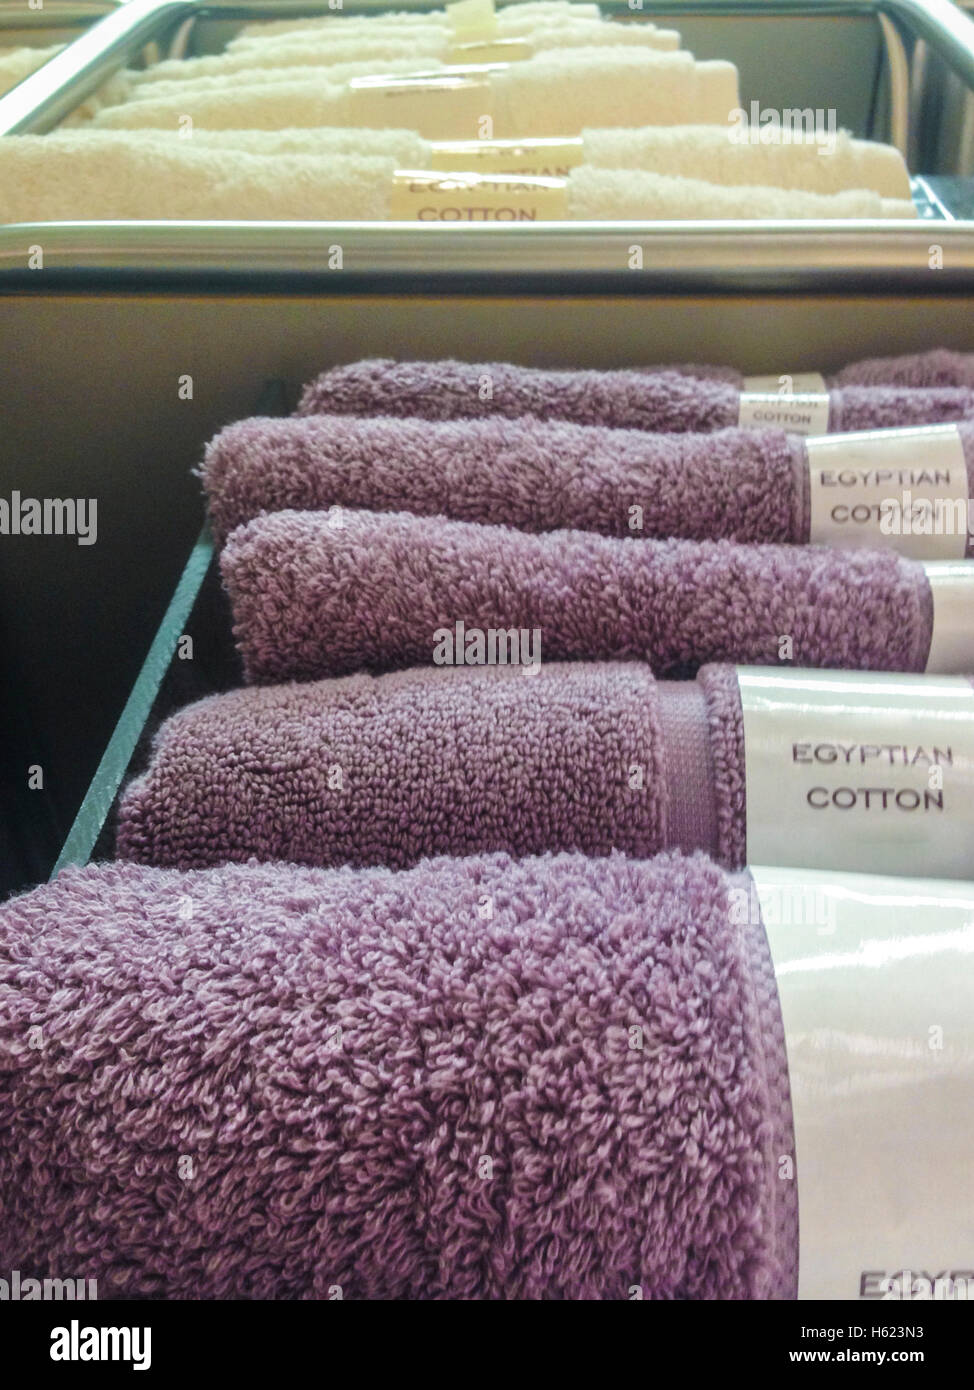 Towels, mats, robes and other home bath wear on shelves made of Egyptian Cotton Stock Photo